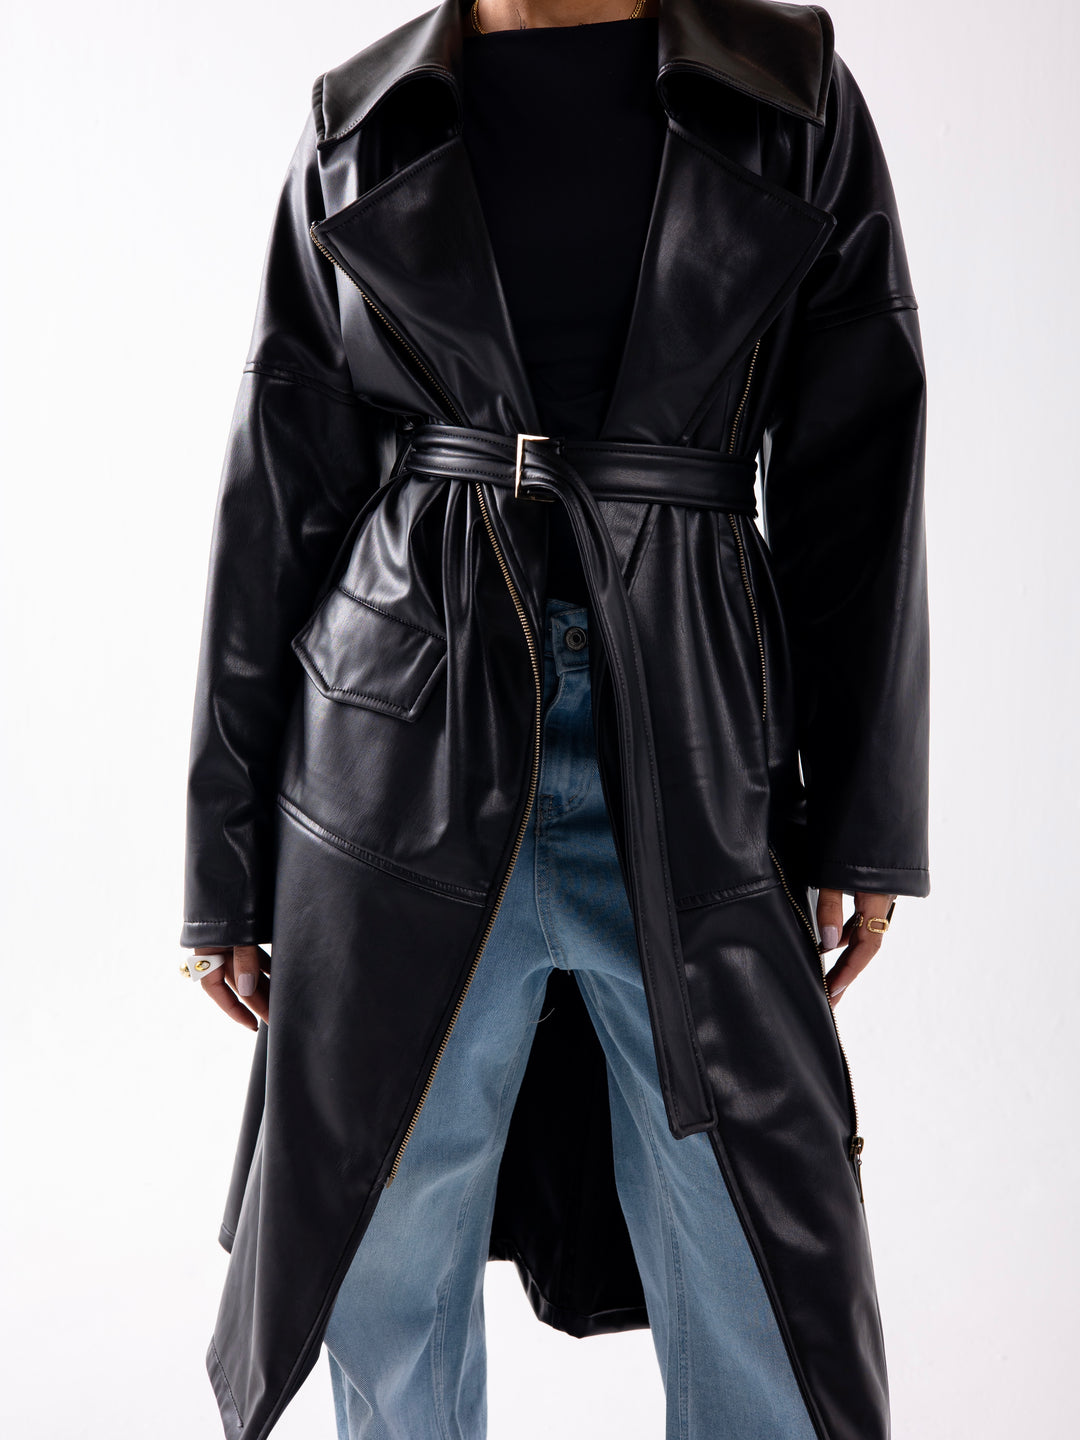 Understated leather coat